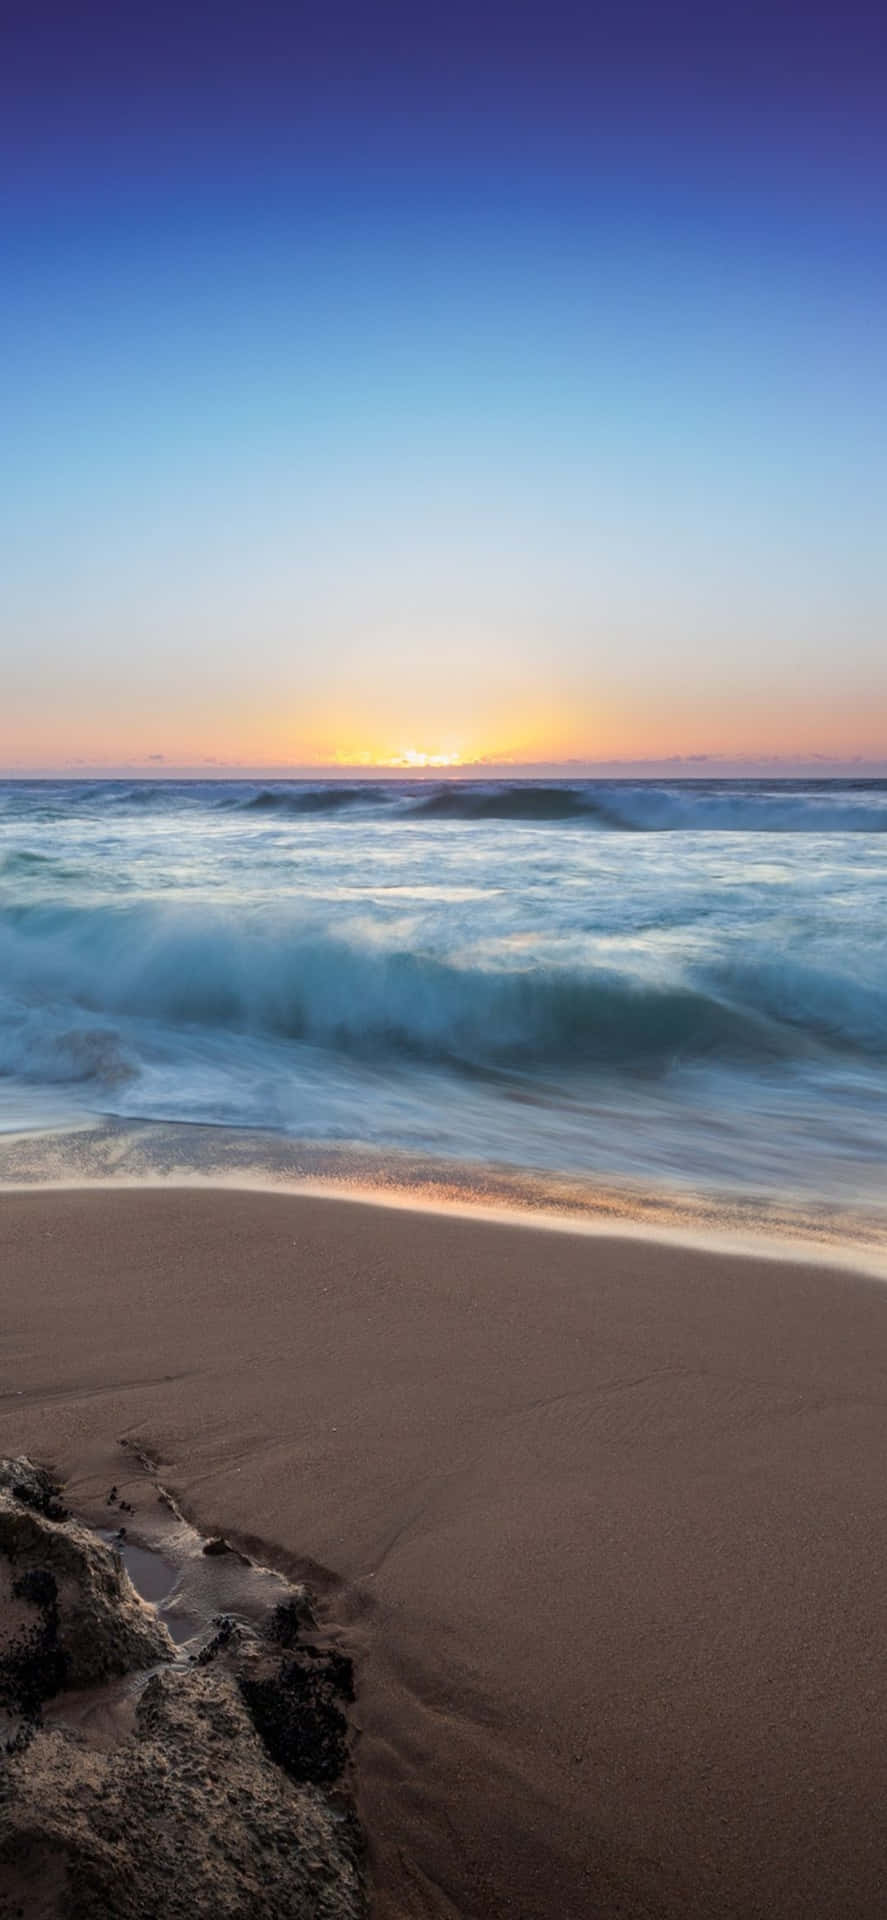 A Serene Iphone X Wallpaper Capturing The Beauty Of The Beach